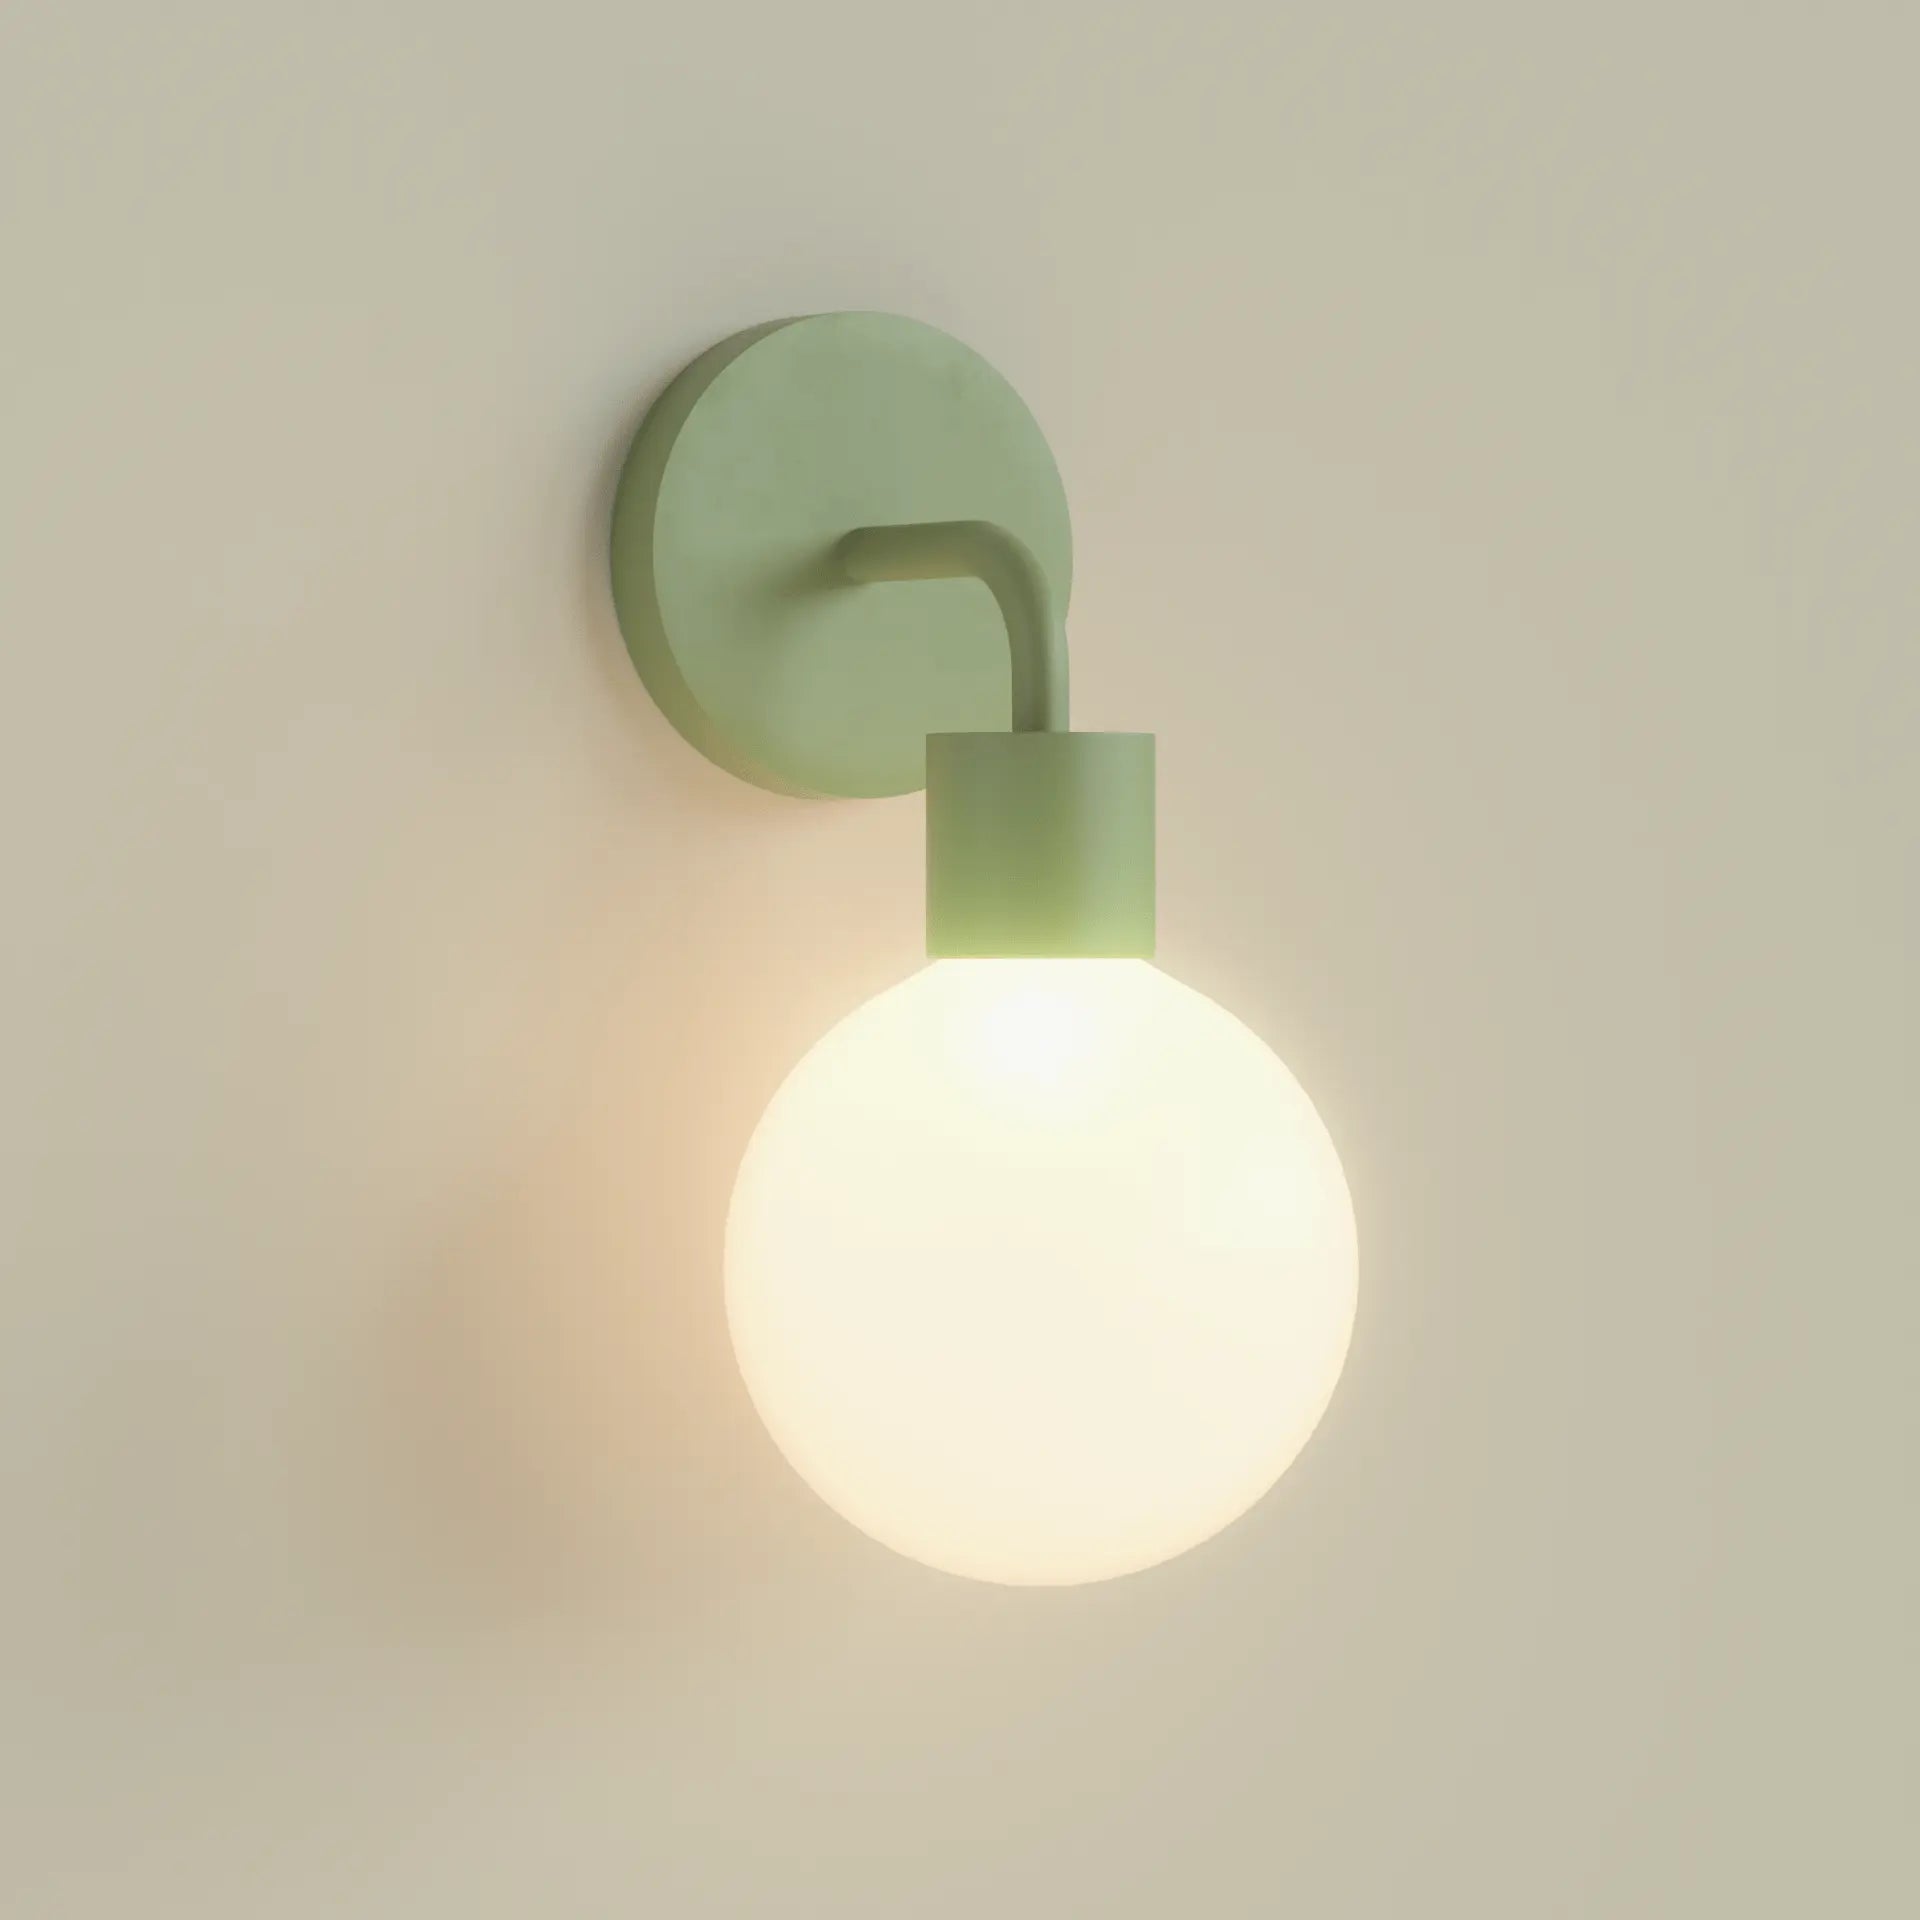 Sage Green renter friendly wall light that installs in seconds